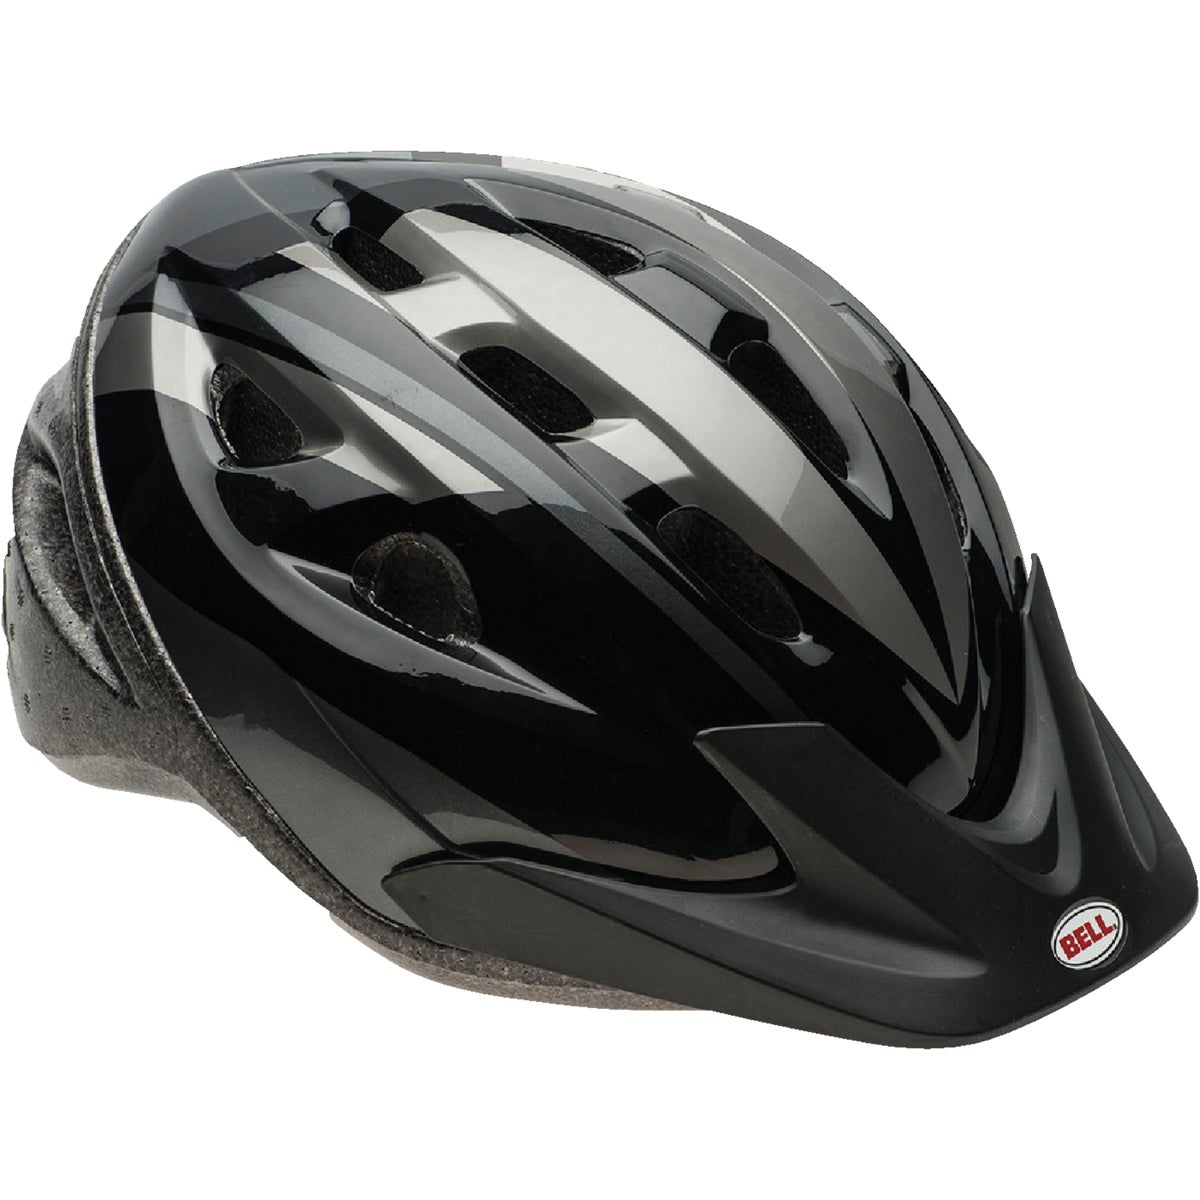 Item 812650, Bike helmet requires just 1 simple adjustment for a comfort fit every time